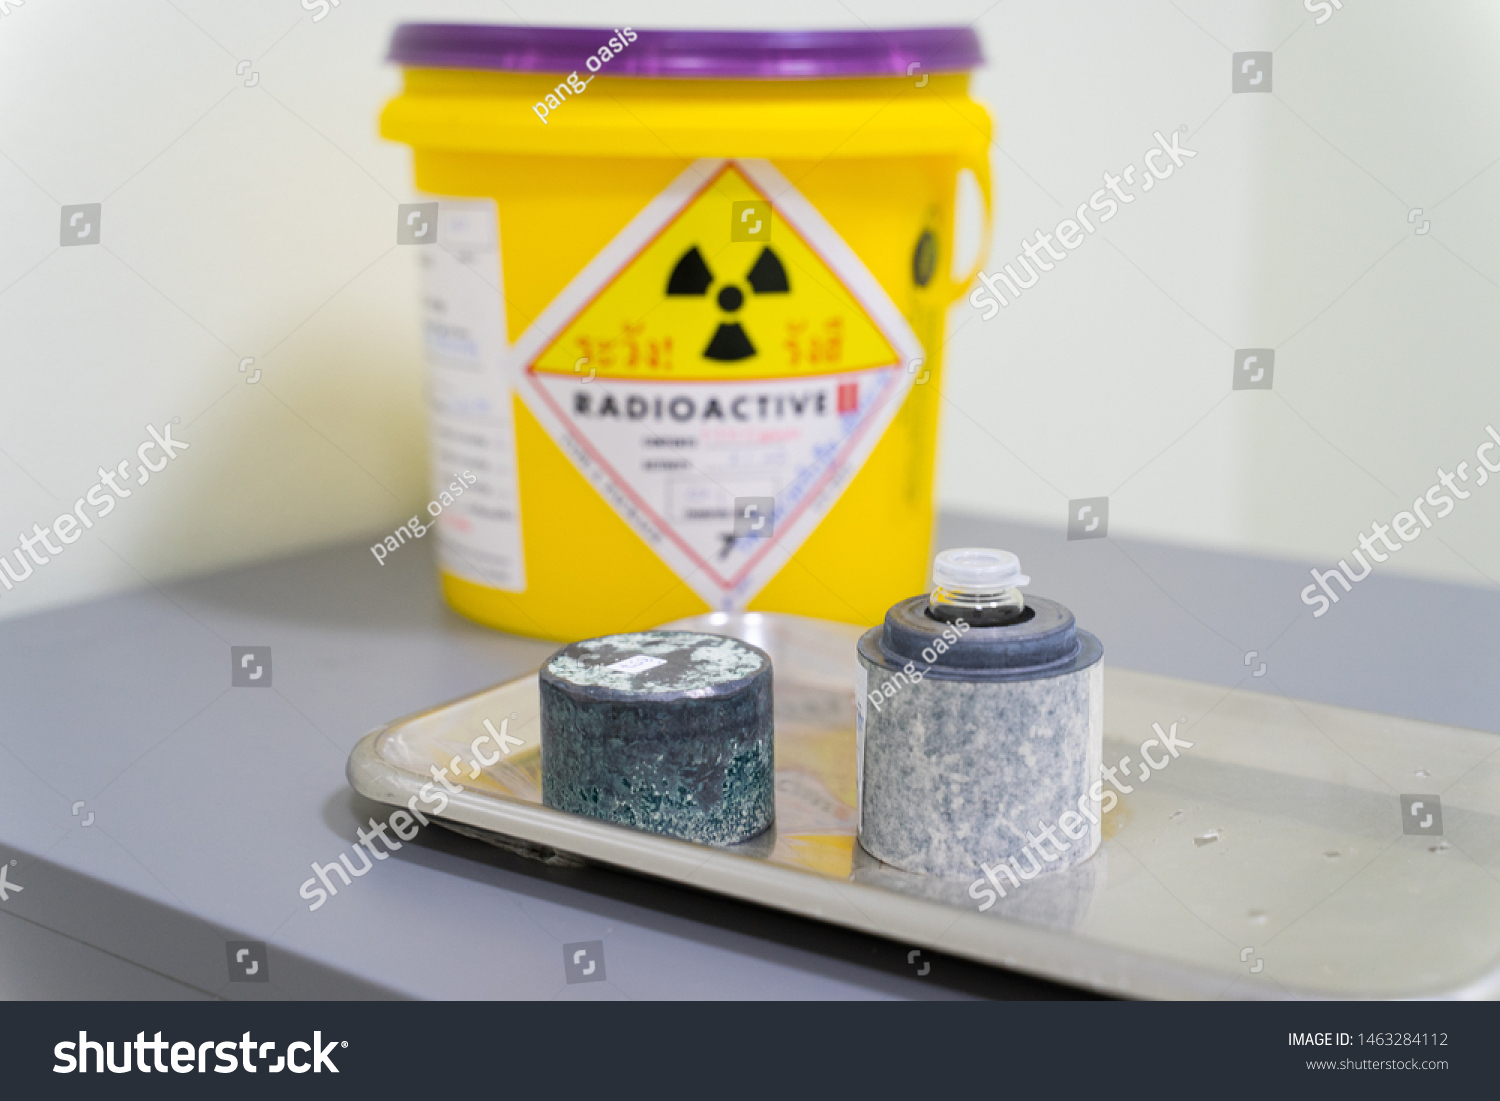 Iodine 131(I-131)Radioactive isotopes used for hyperthyroidism treatment are stored in Lead boxes for safety. #1463284112